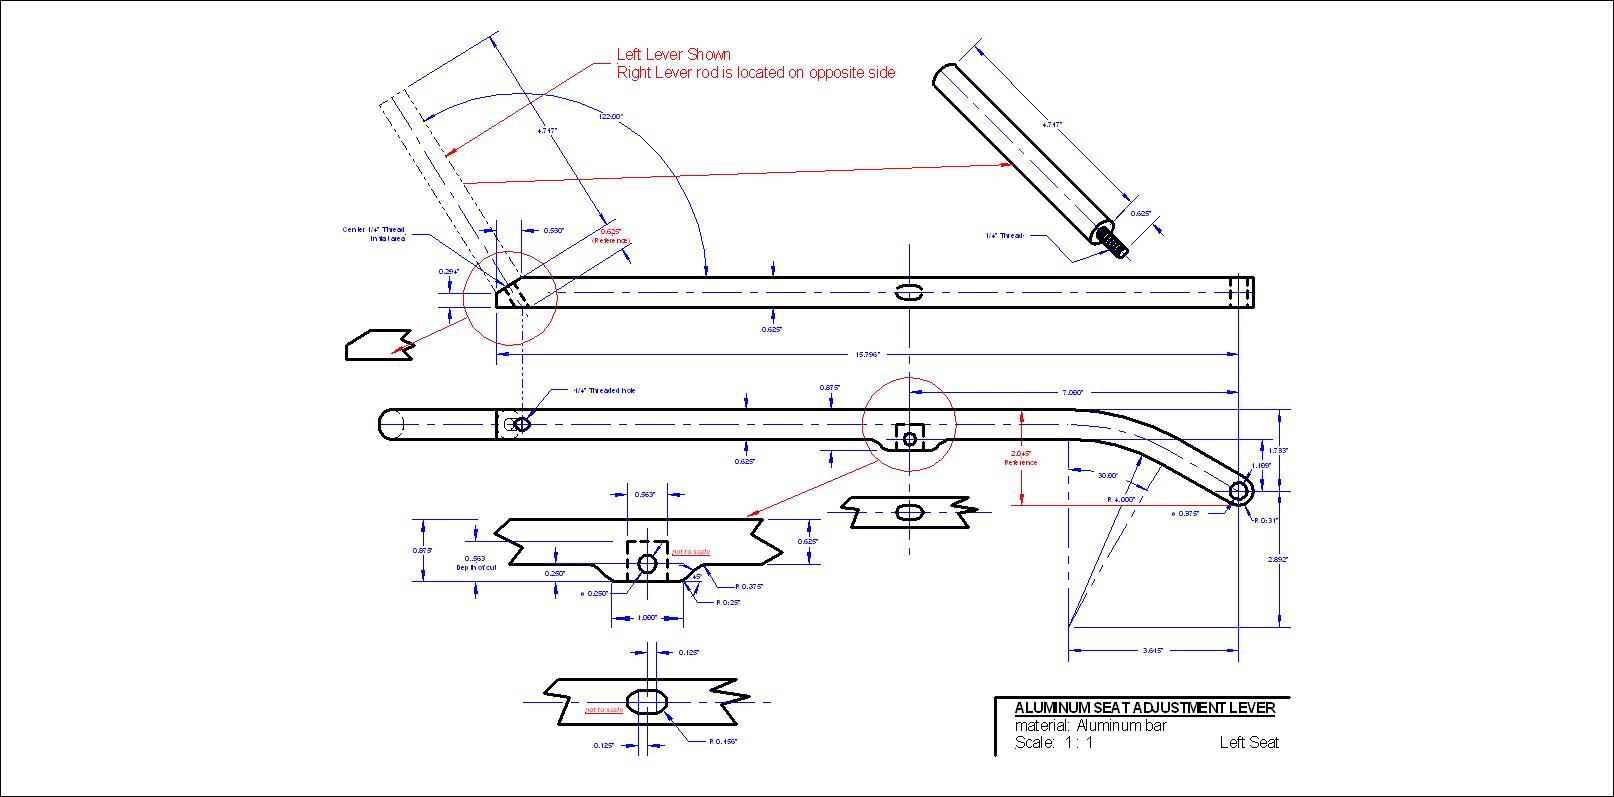 seat lever drawing